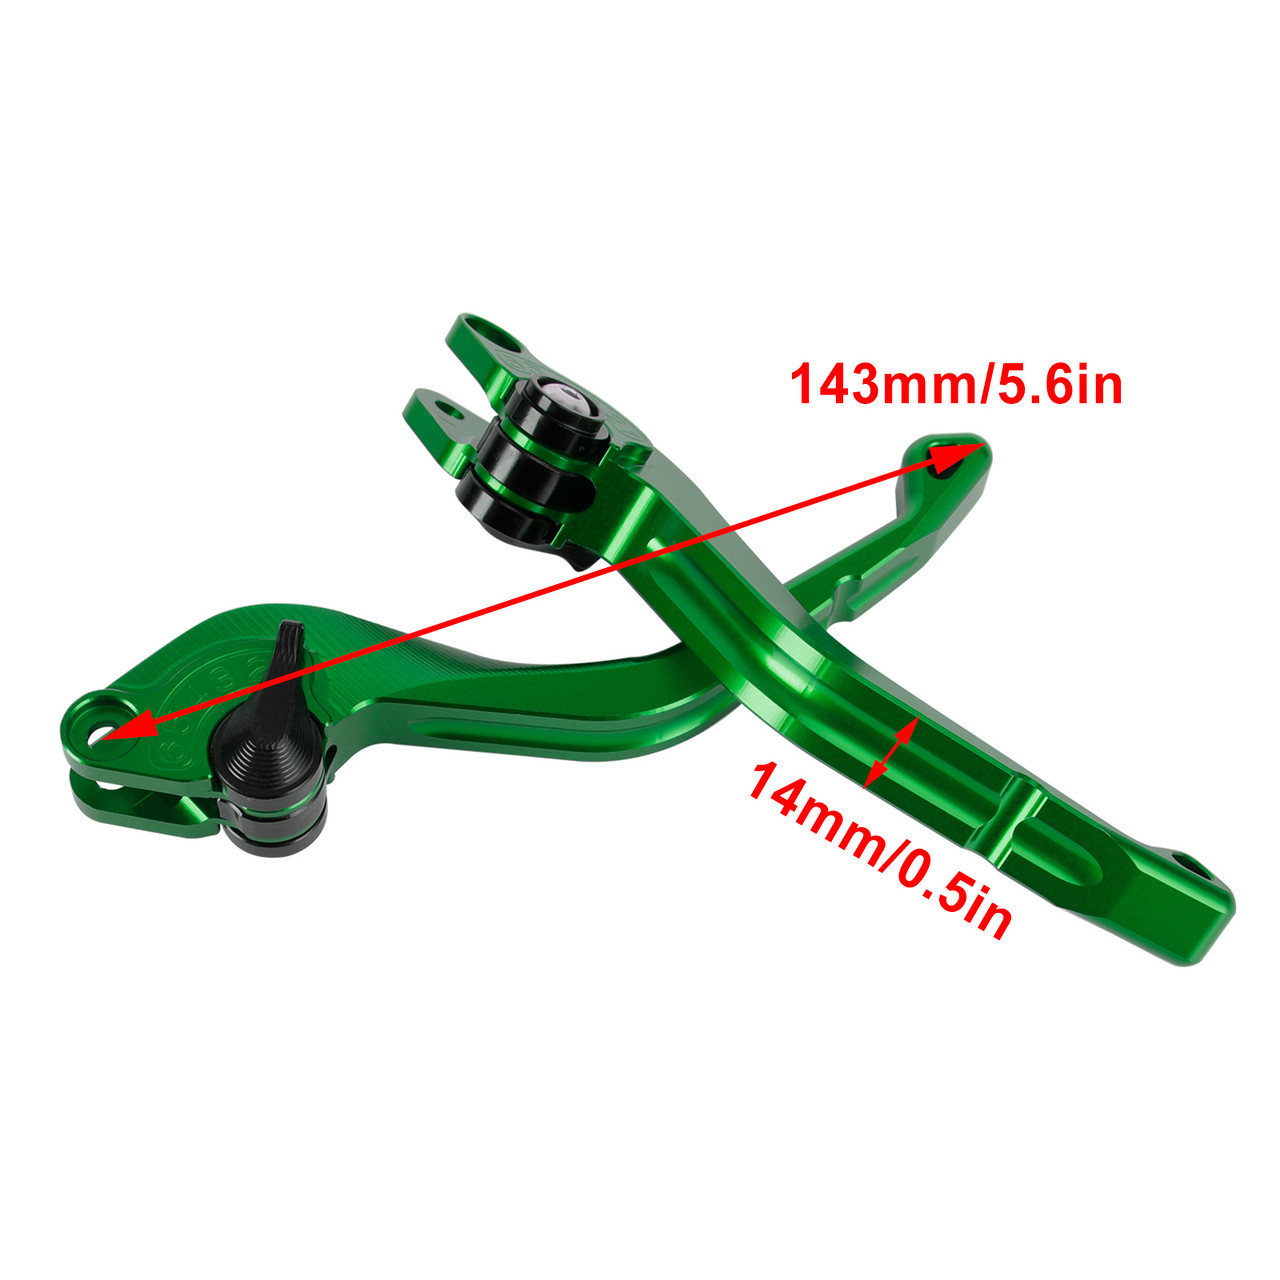 CNC Short Clutch Brake Lever fit for Ducati 749 999/S/R 848 1098 1198 S4RS